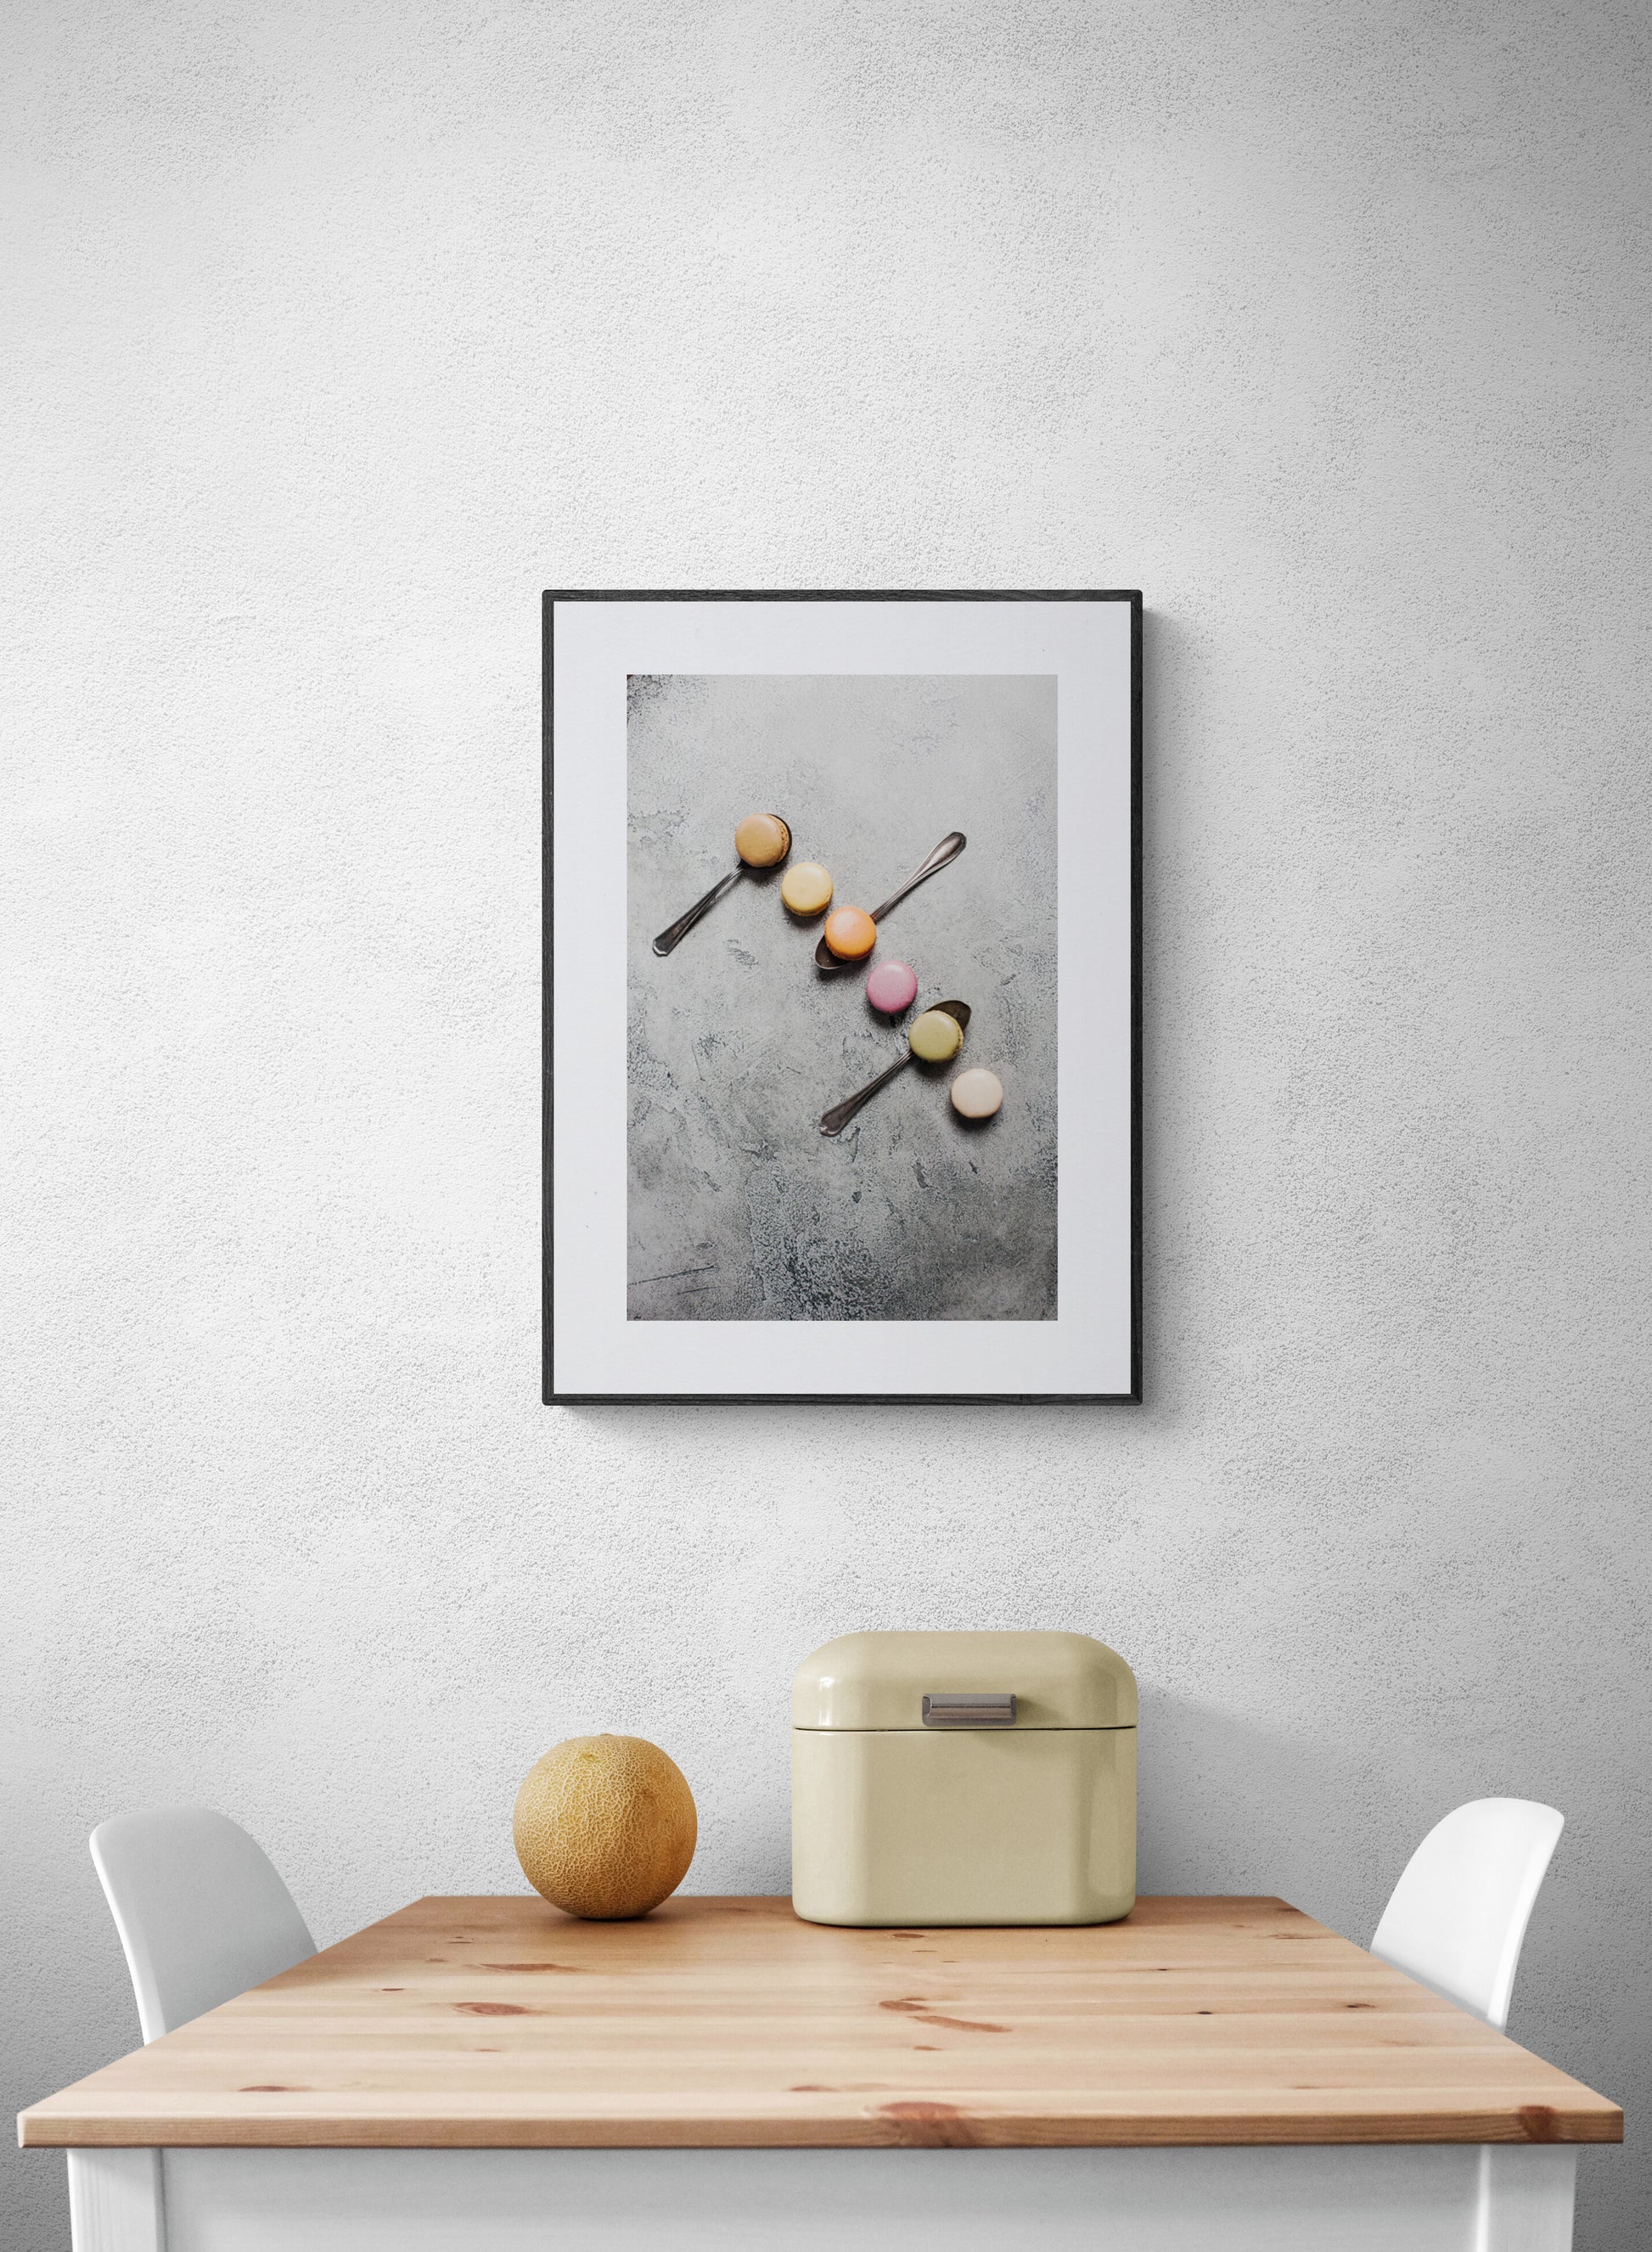 Macarons Photograph Print in a kitchen nook as wall art